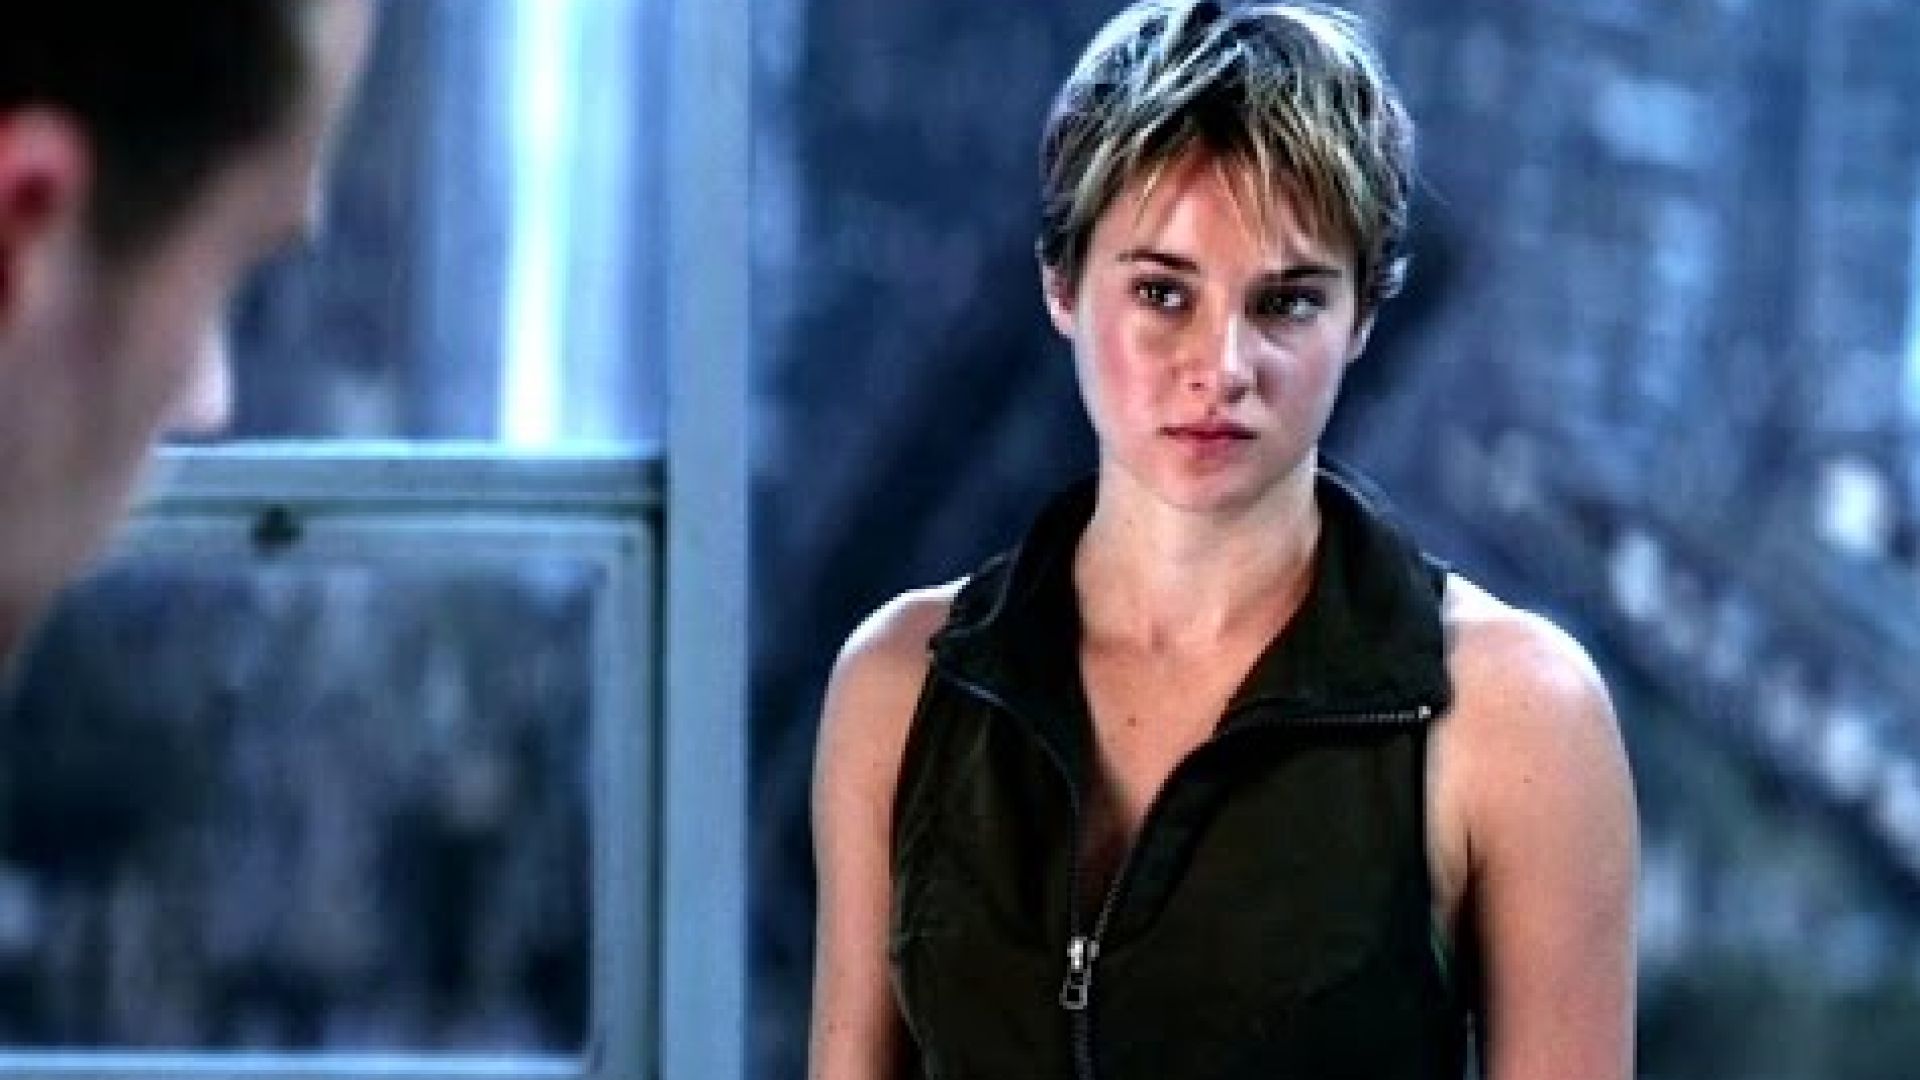 She&#039;s the Perfect Subject in New Clip from &#039;Insurgent&#039;